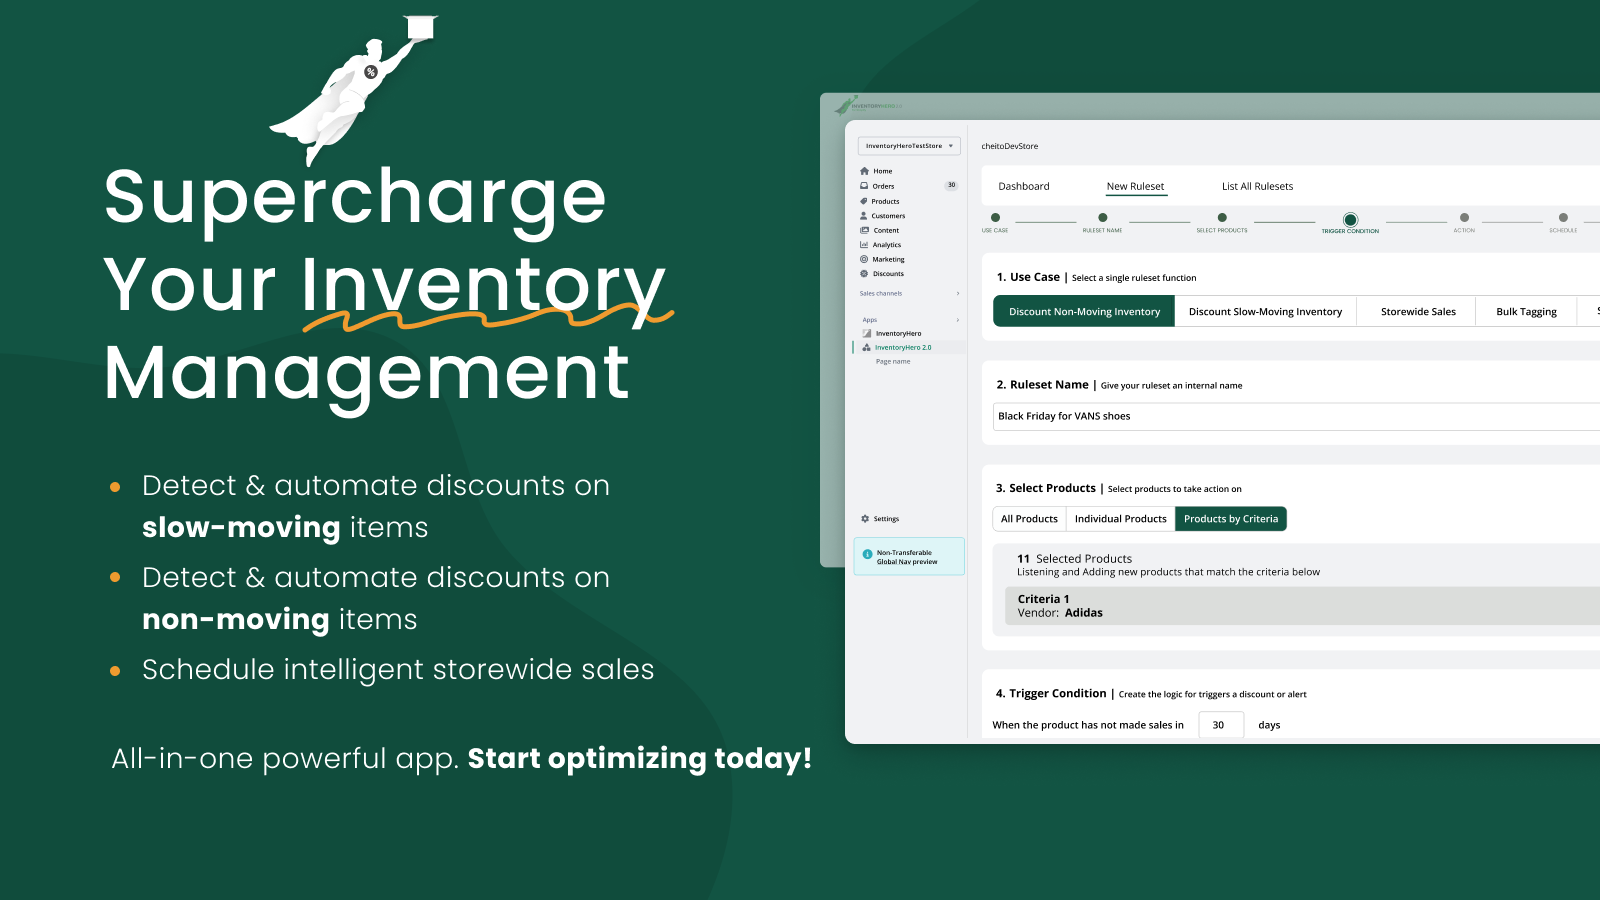 5-in-1 Inventory Management App! Save money and reduce apps